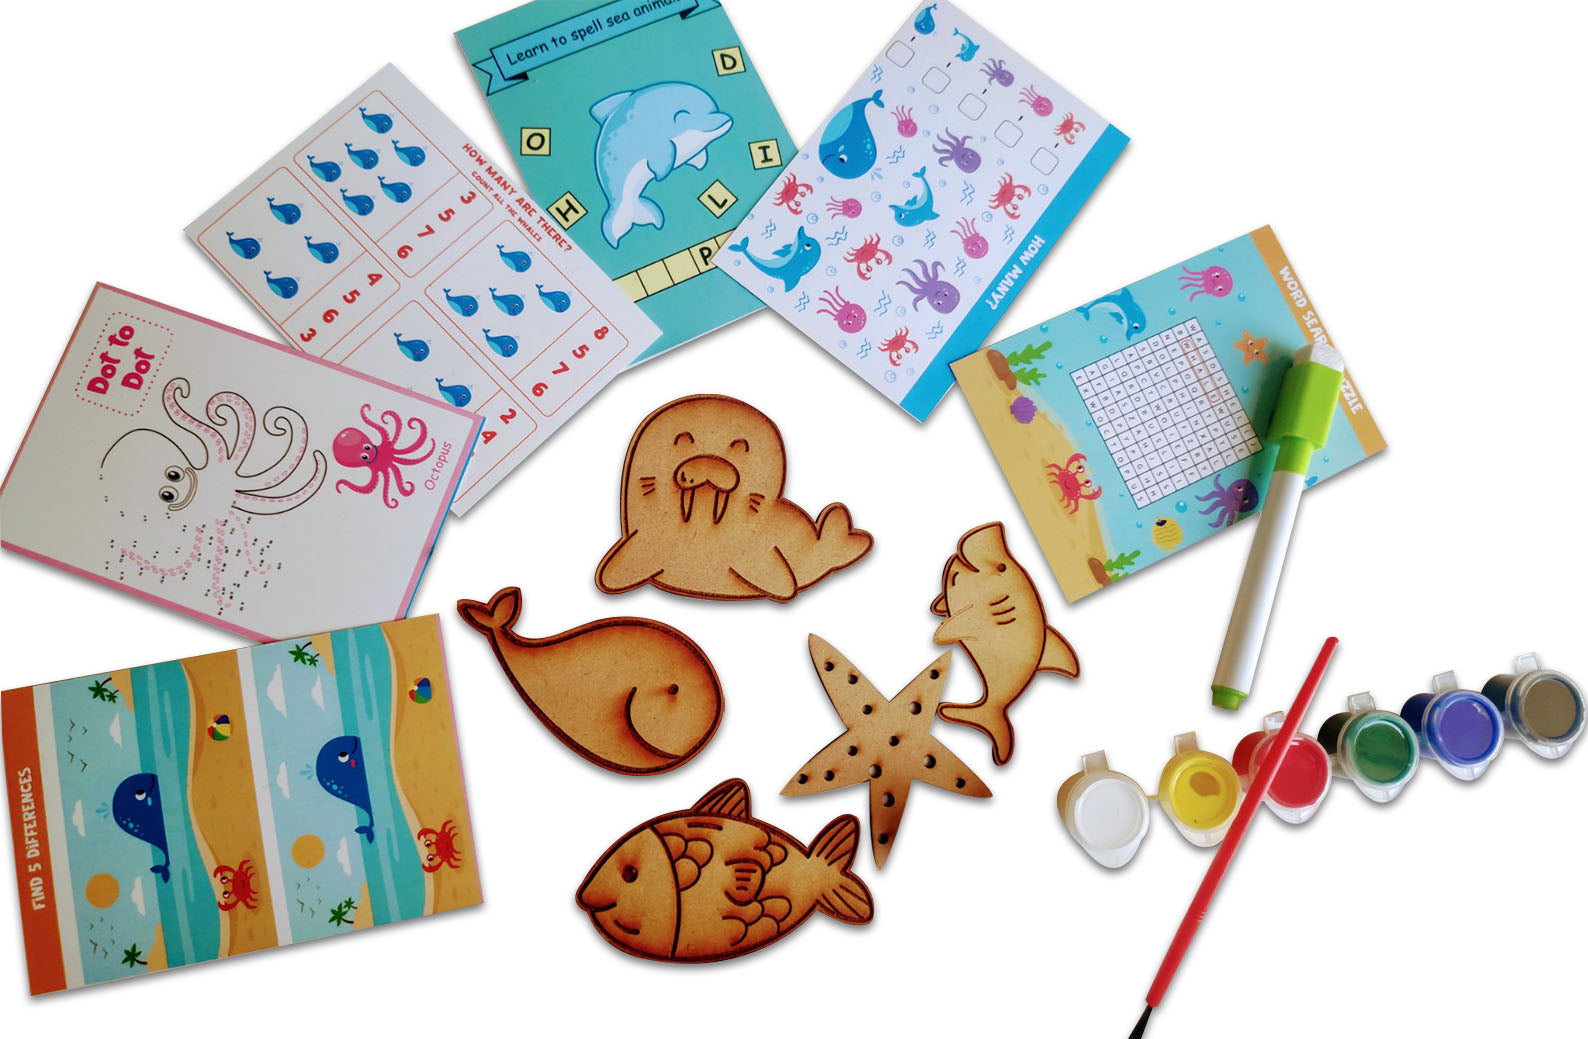 Sea animals flashcards with wooden cutout activity - PyaraBaby